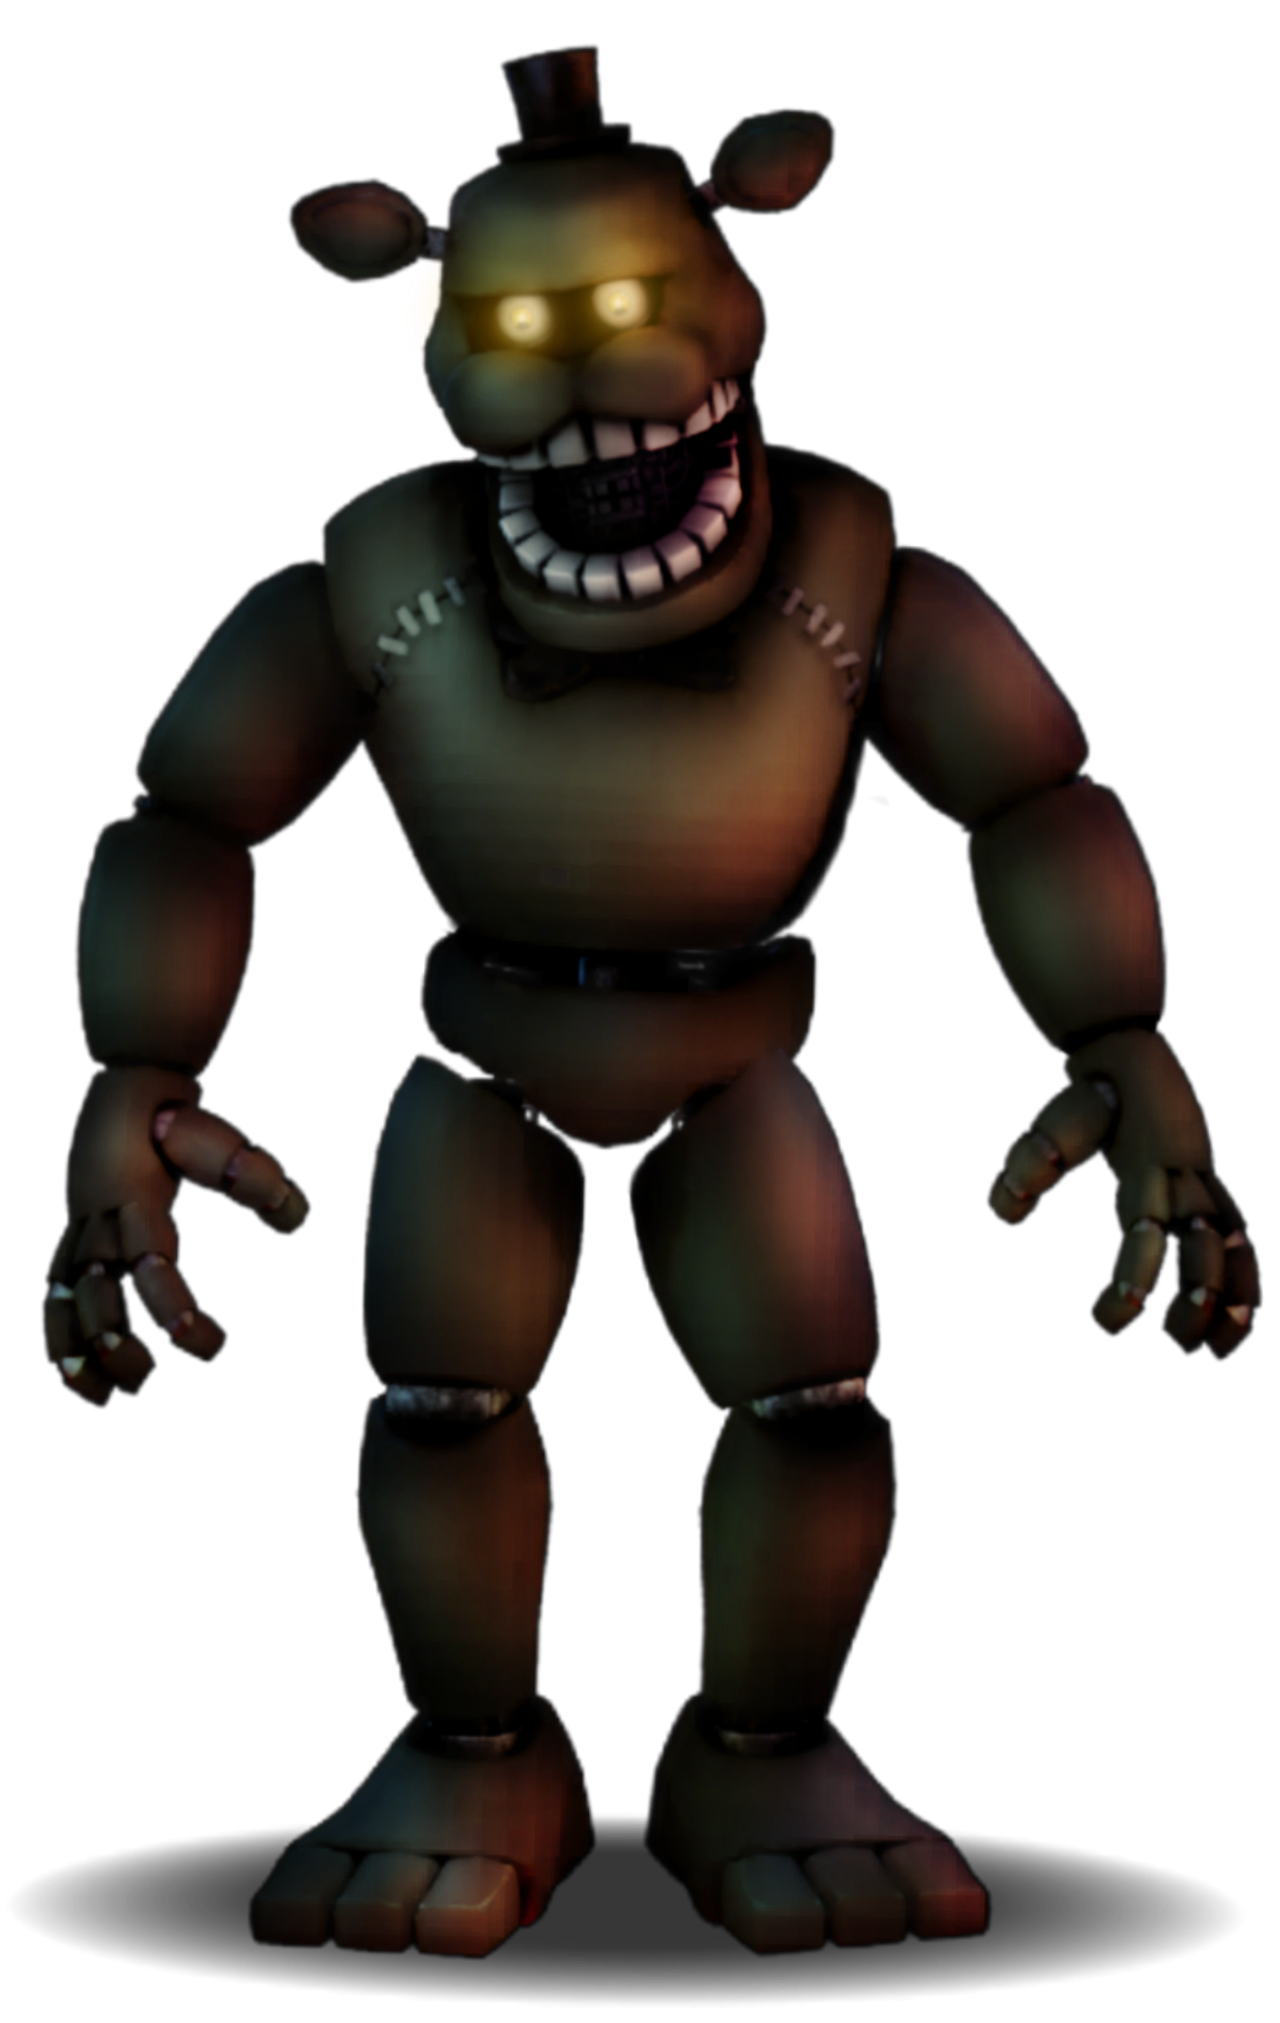 Fixed Withered Chica [FNAF Speed Edit] by Zexityreez on DeviantArt